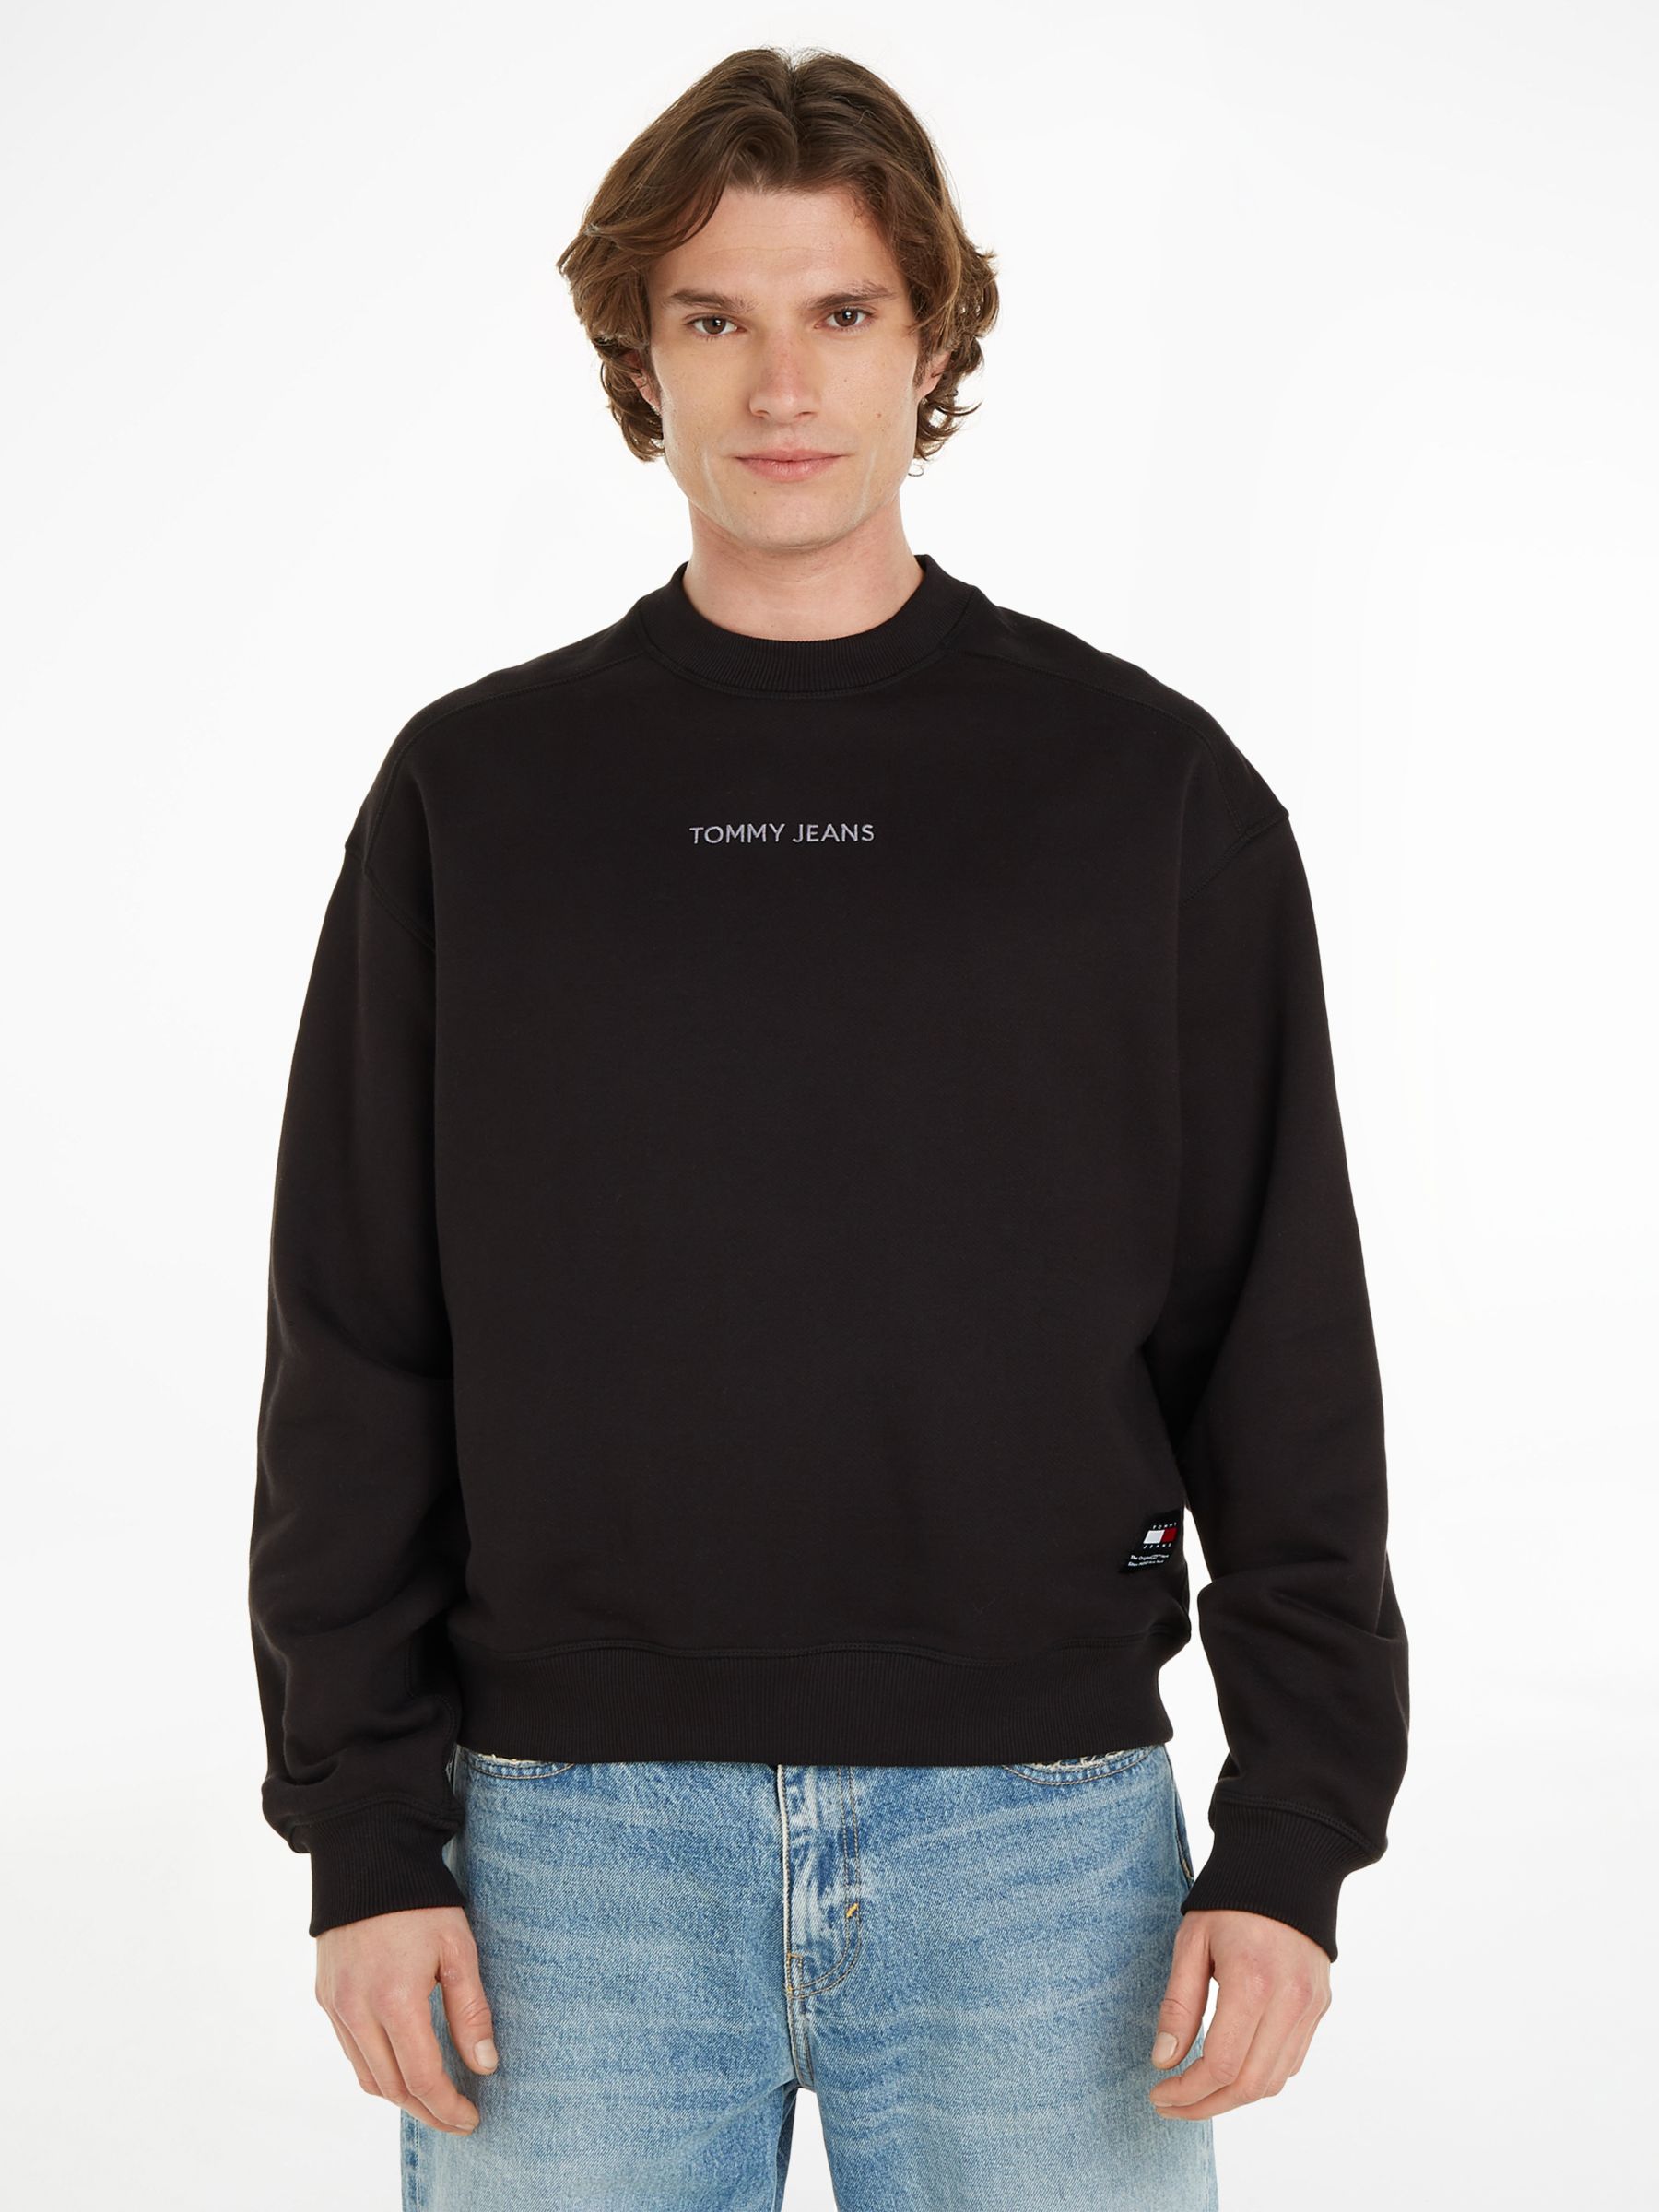 Tommy Jeans Boxy Jumper, Black at John Lewis & Partners